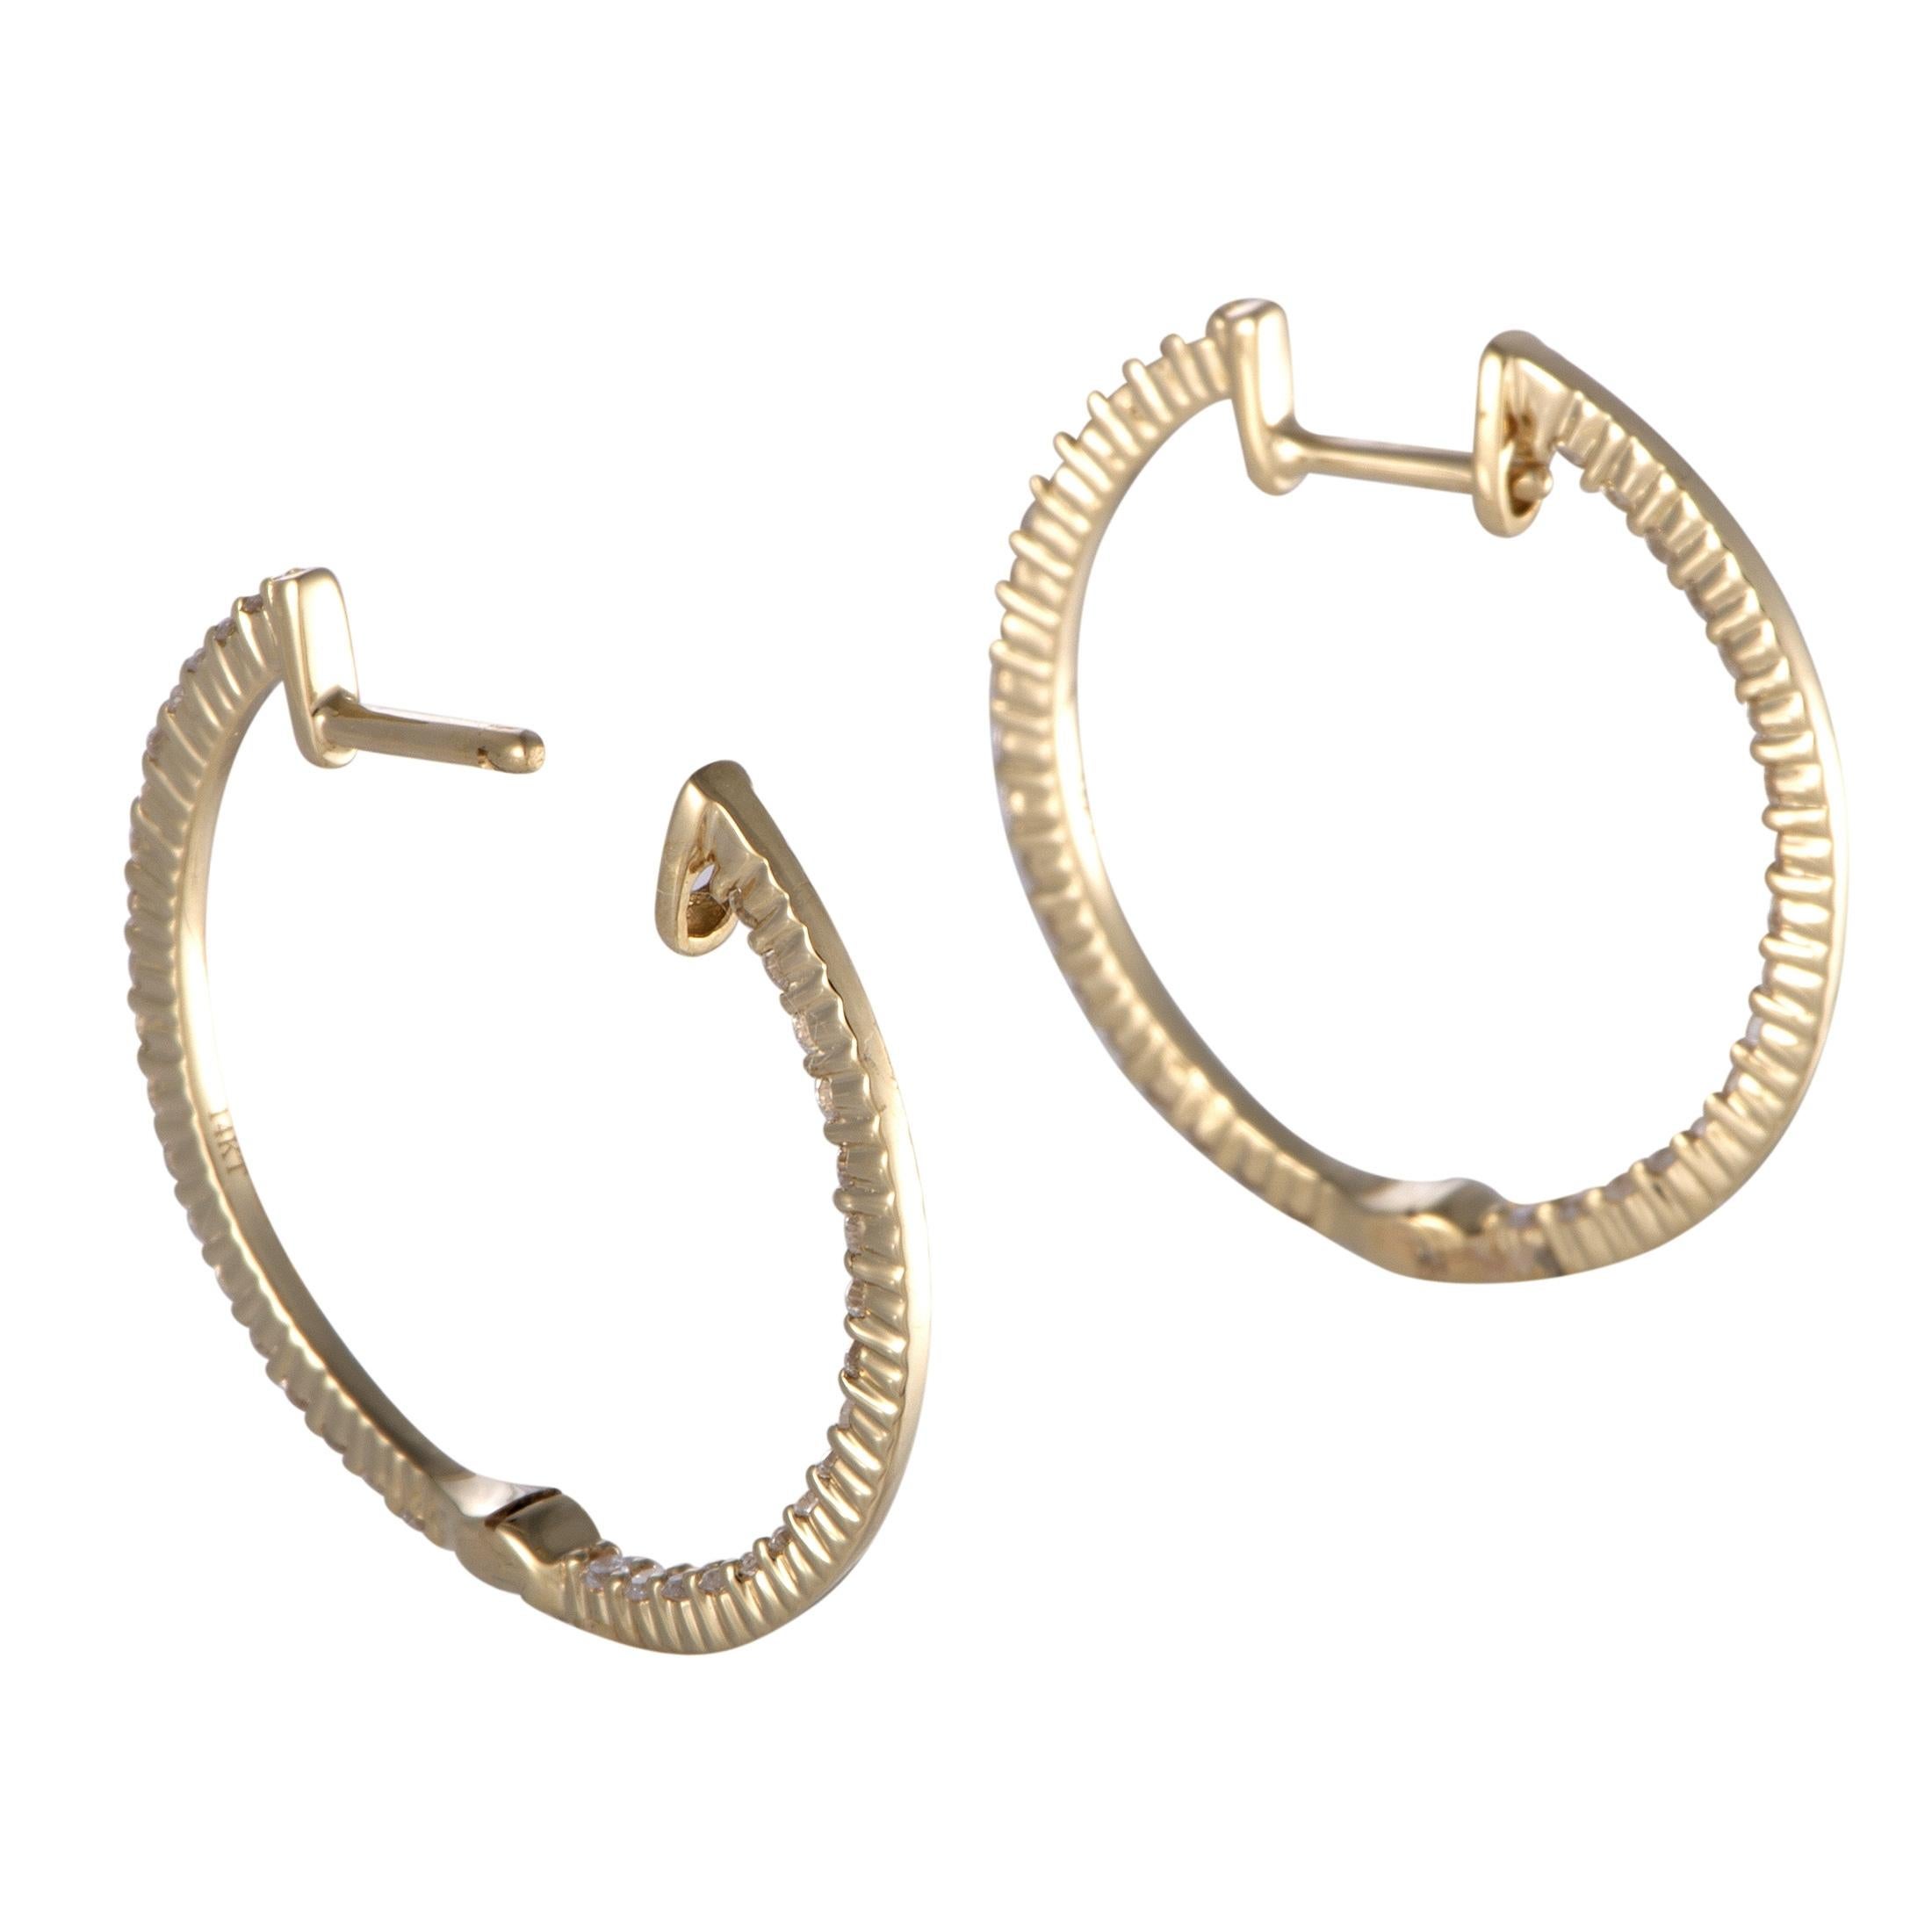 Employing the classically appealing blend of radiant 14K yellow gold and prestigiously resplendent diamonds amounting to 0.75ct, these tasteful earrings offer an appearance of understated femininity.